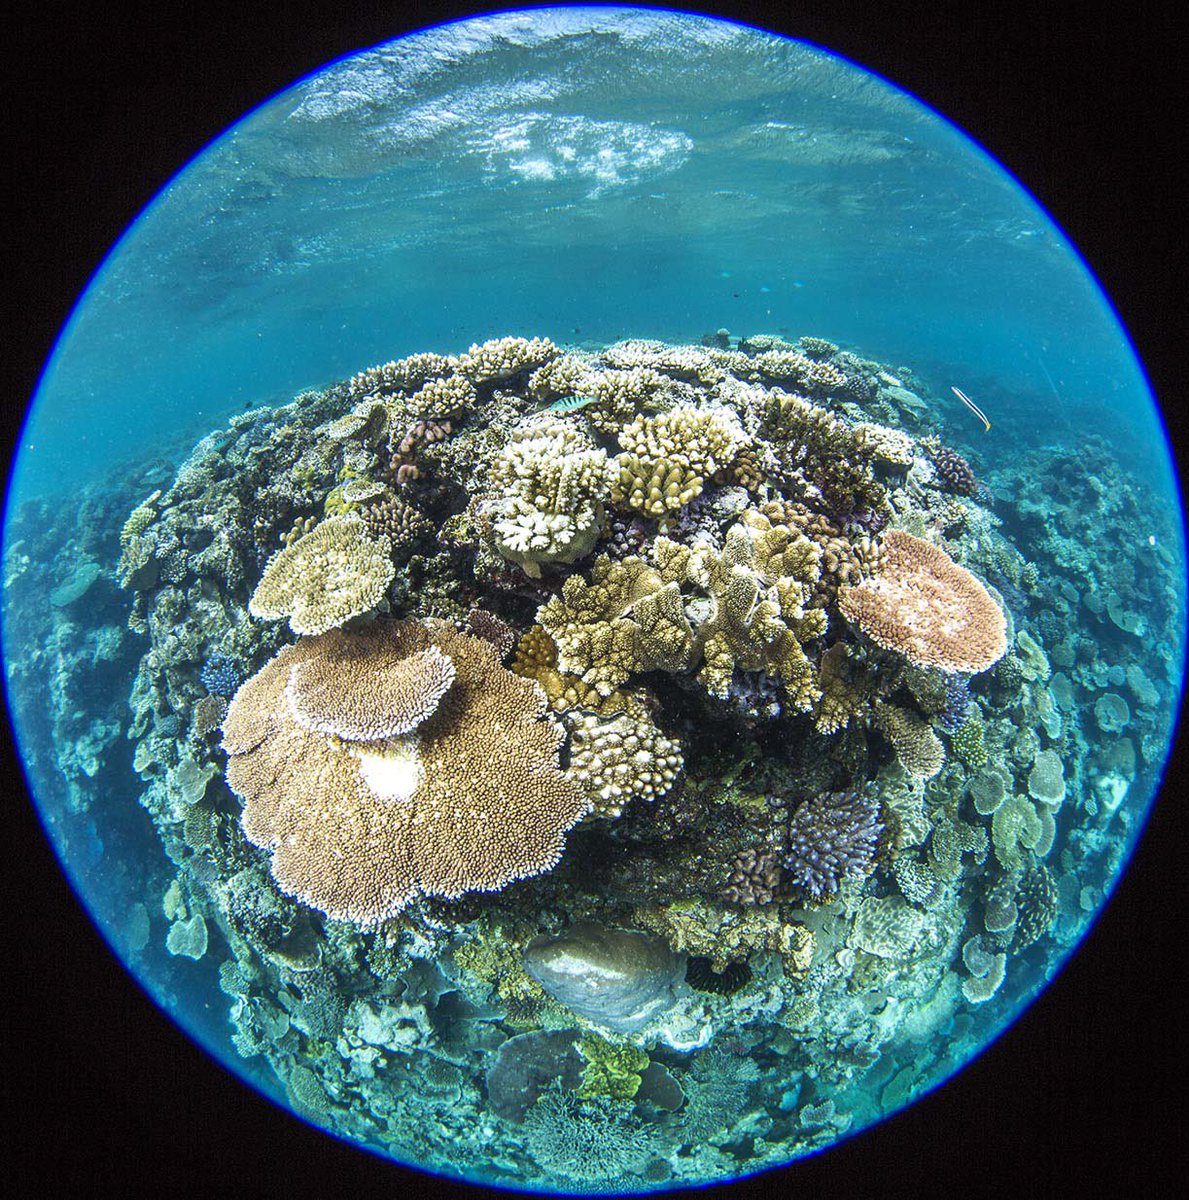 Post-doc position at University of Queensland for computational biologist applying their skills to conservation of the Great Barrier Reef. Genuine search for someone with right to work here. Deadline 23 May. Potential to extend contract. tinyurl.com/47d2h83f